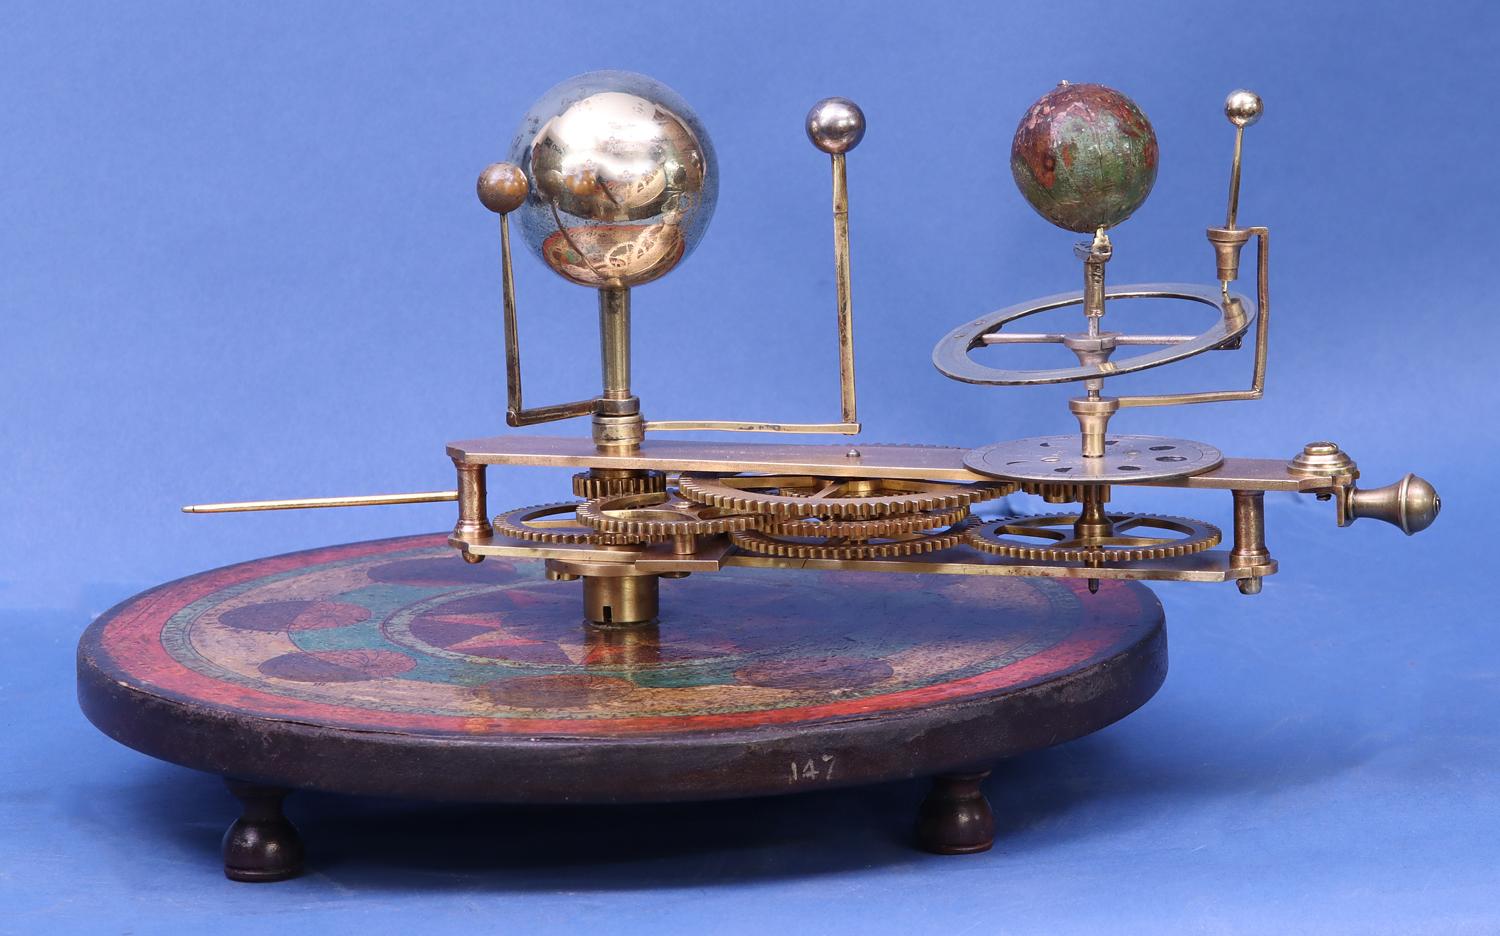 c.1800 Portable English Orrery by W. Robinson

The circular base is covered with a brightly decorated polychrome paper that shows the astrological houses, the months, visual displays of the orientation of the inclination of the earth throughout the